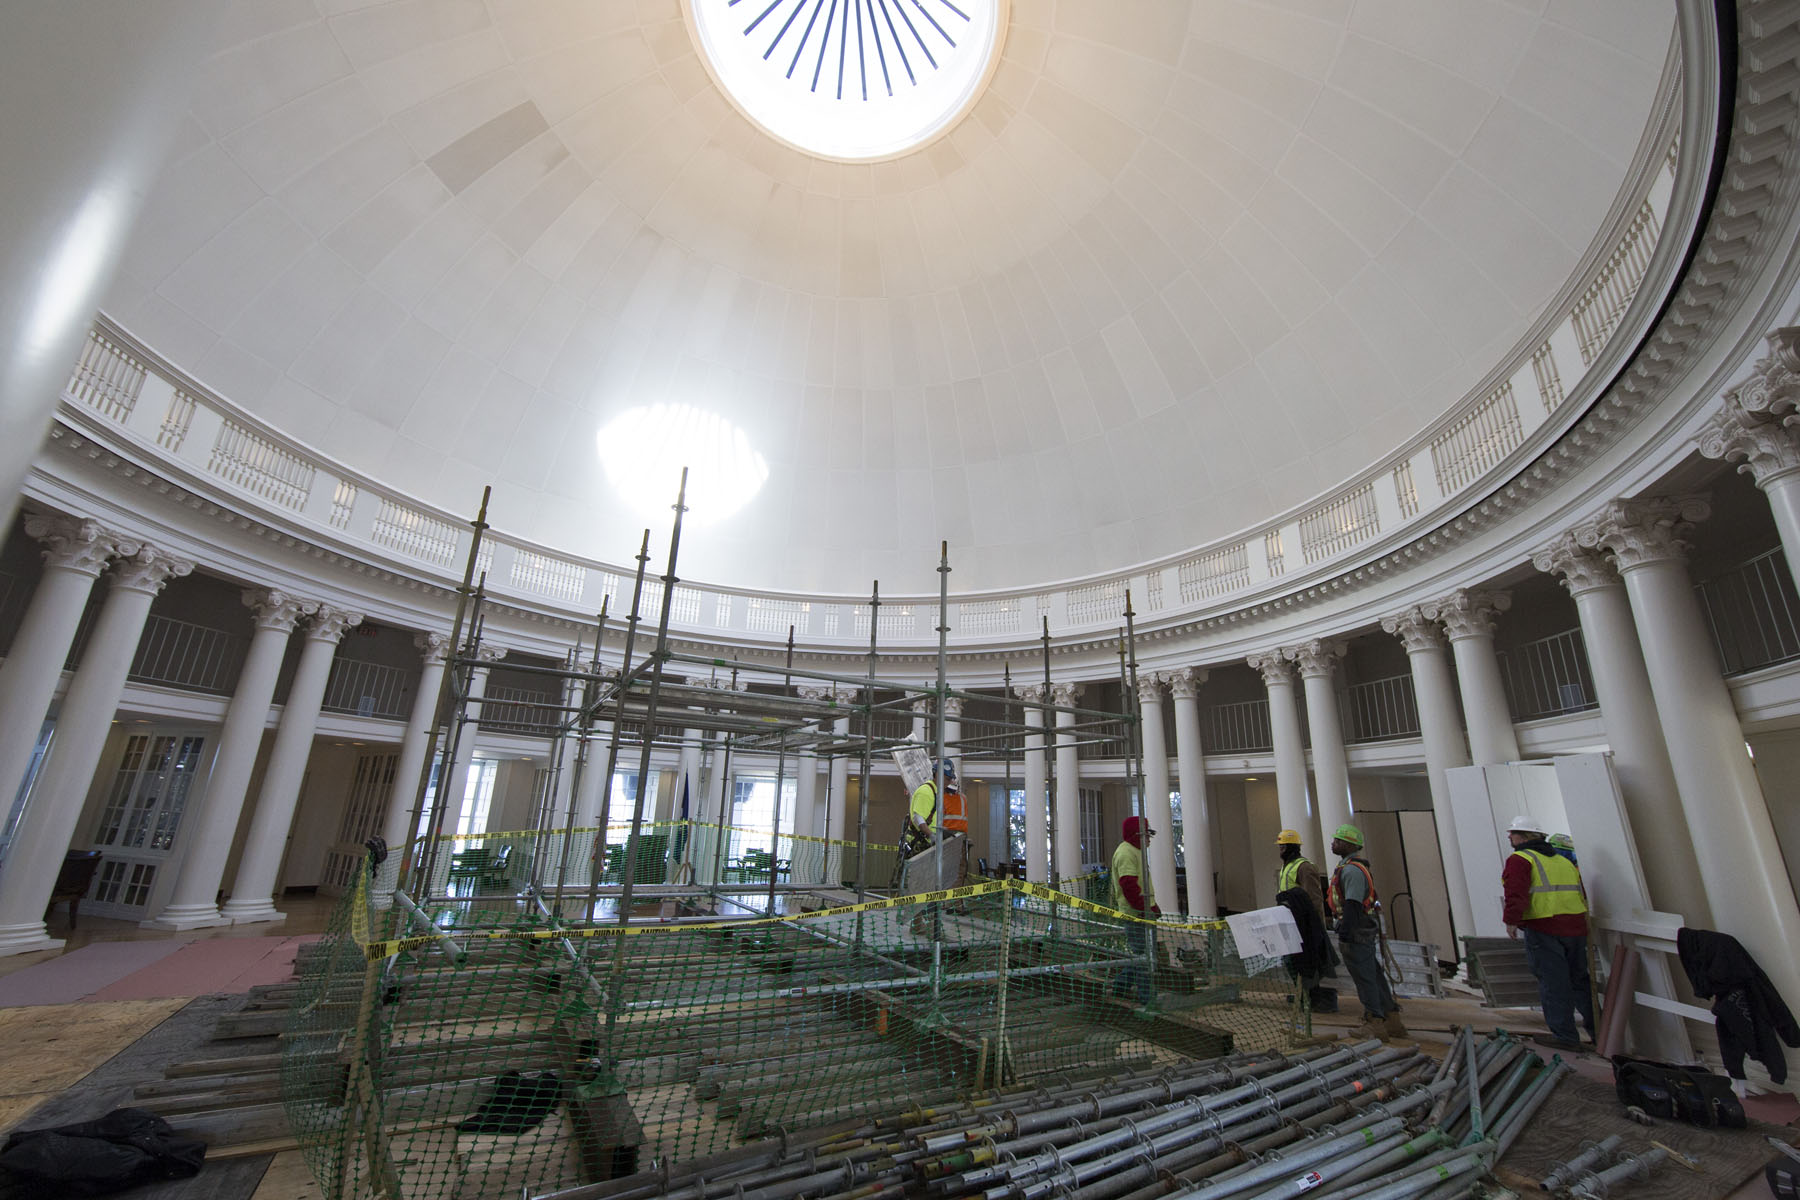 Scaffolding inside of the Rotunda Dome room surrounded by construction workers